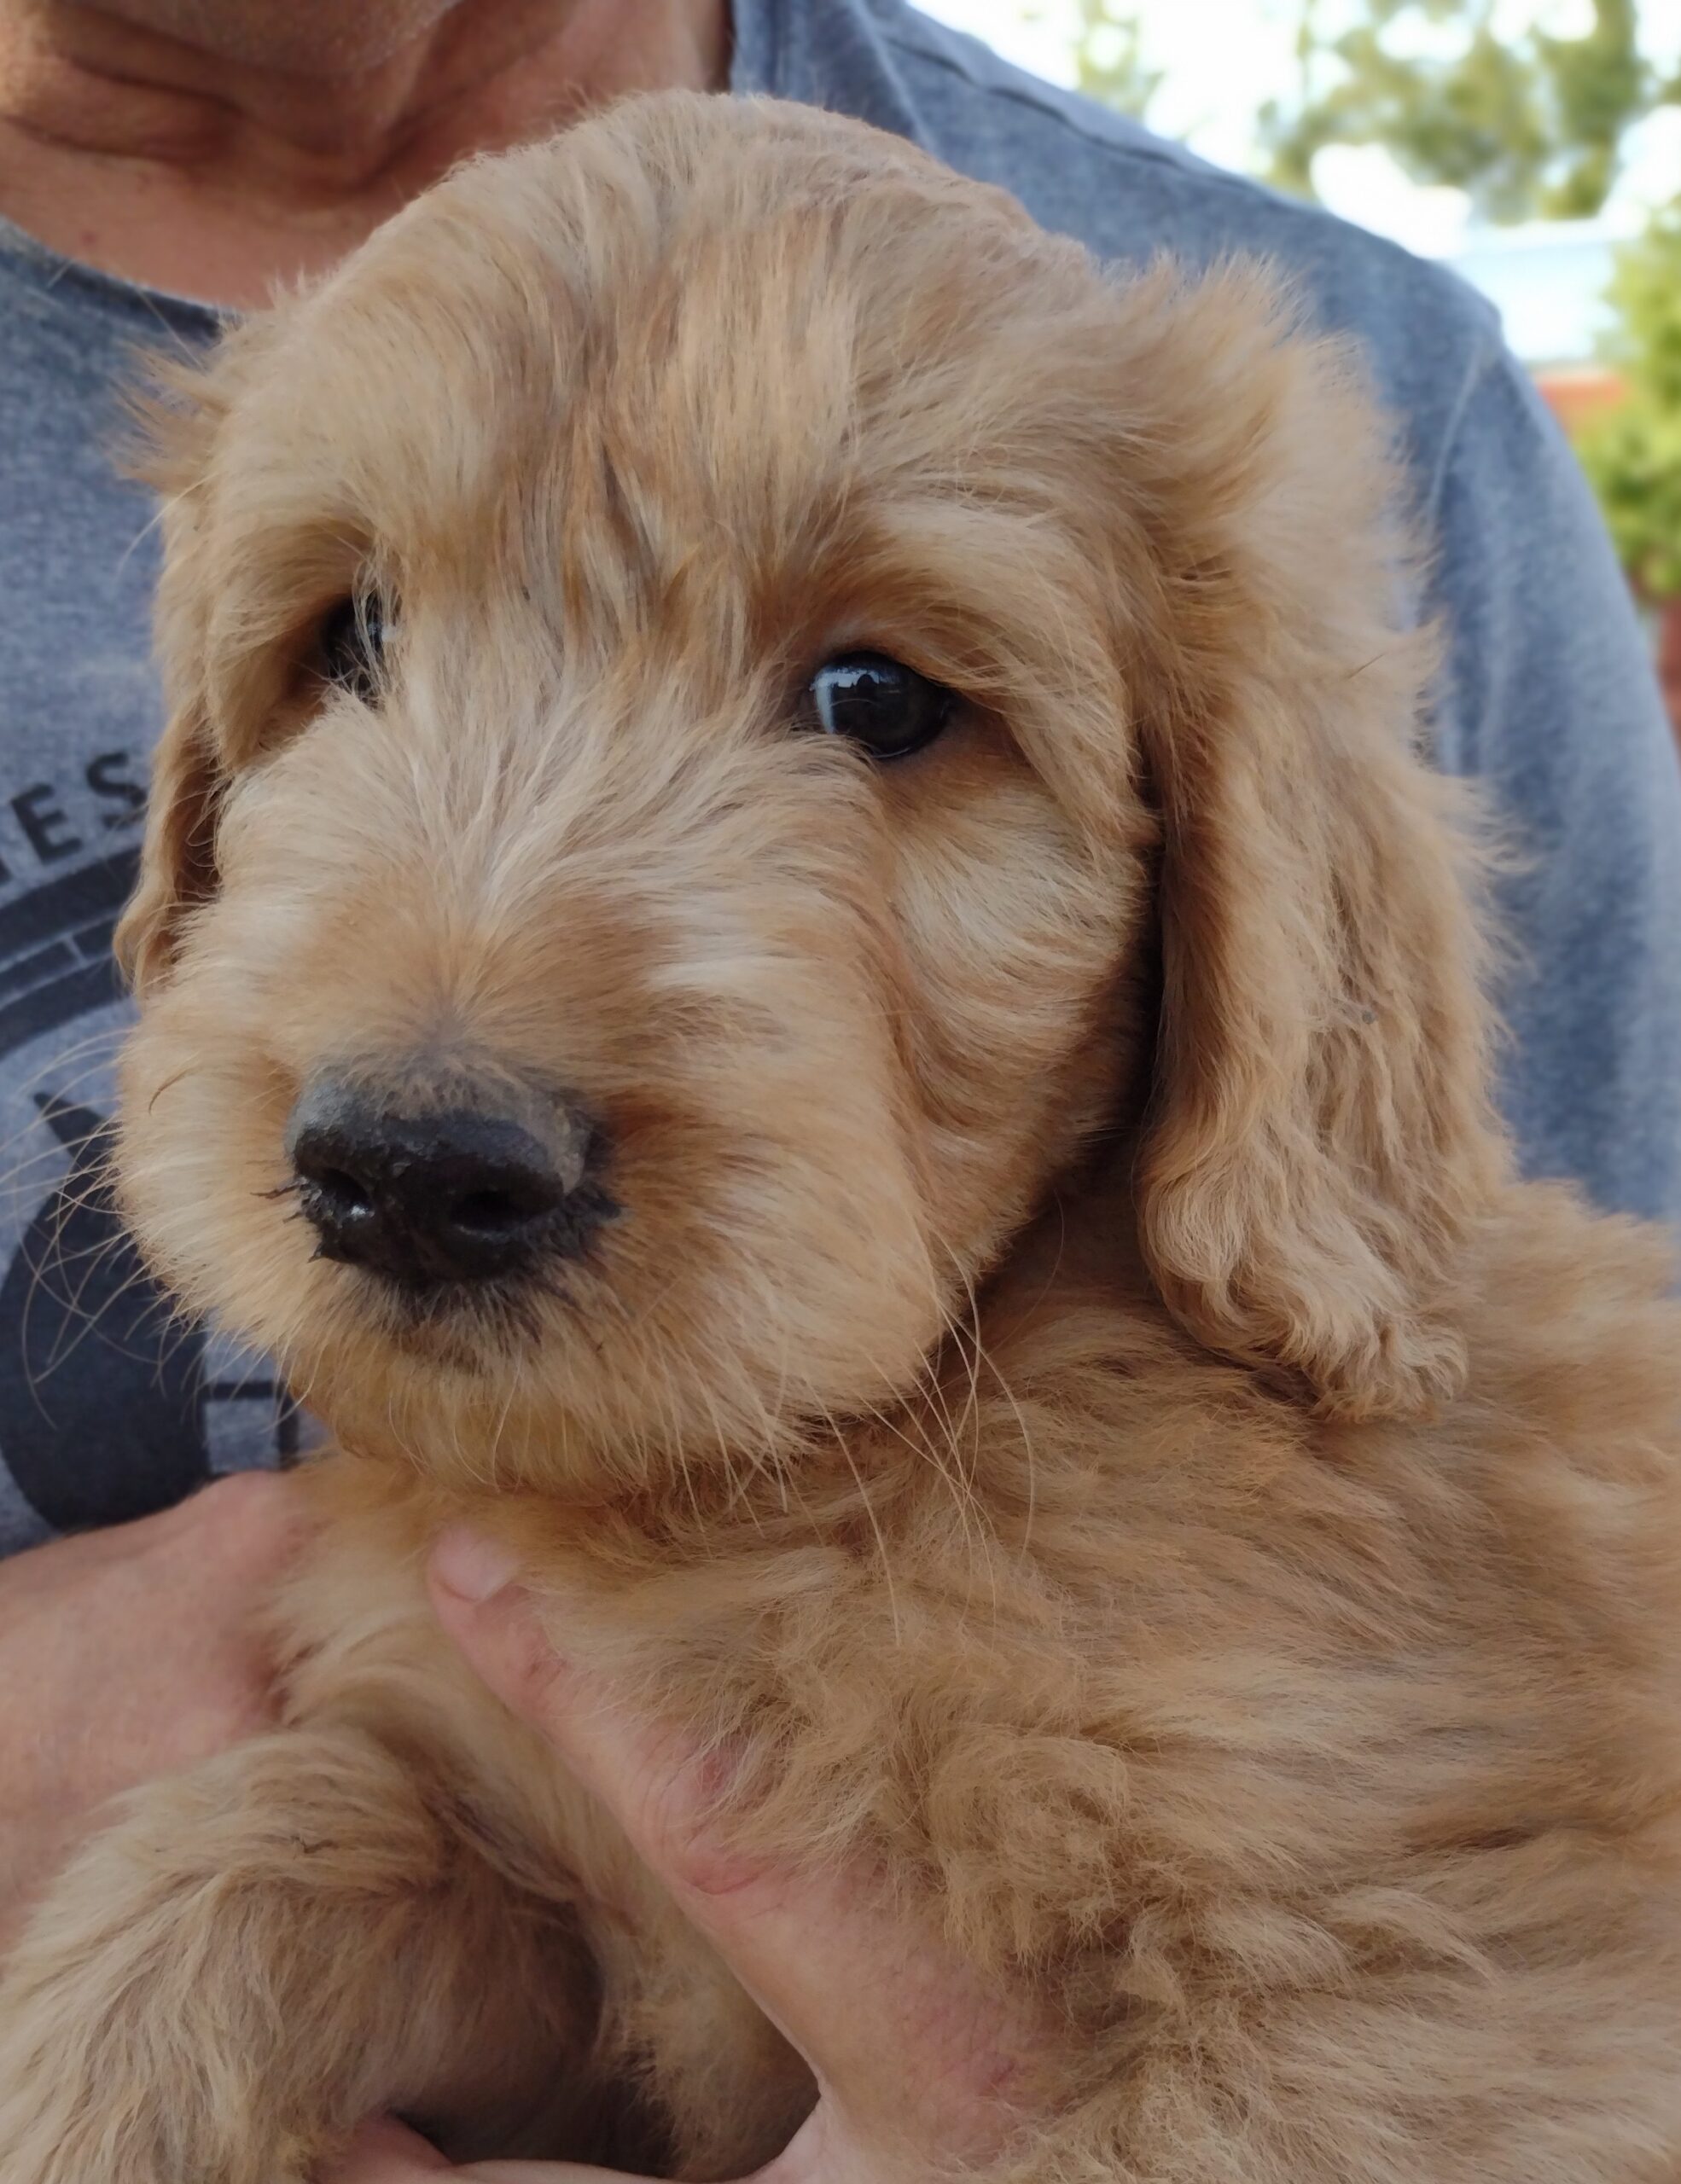 CONGRATULATIONS To Art And Carolyn In North Carolina On Your Addition Of Marley, A Goldendoodle Puppy From Red Cedar Farms In Hutchinson, MN!